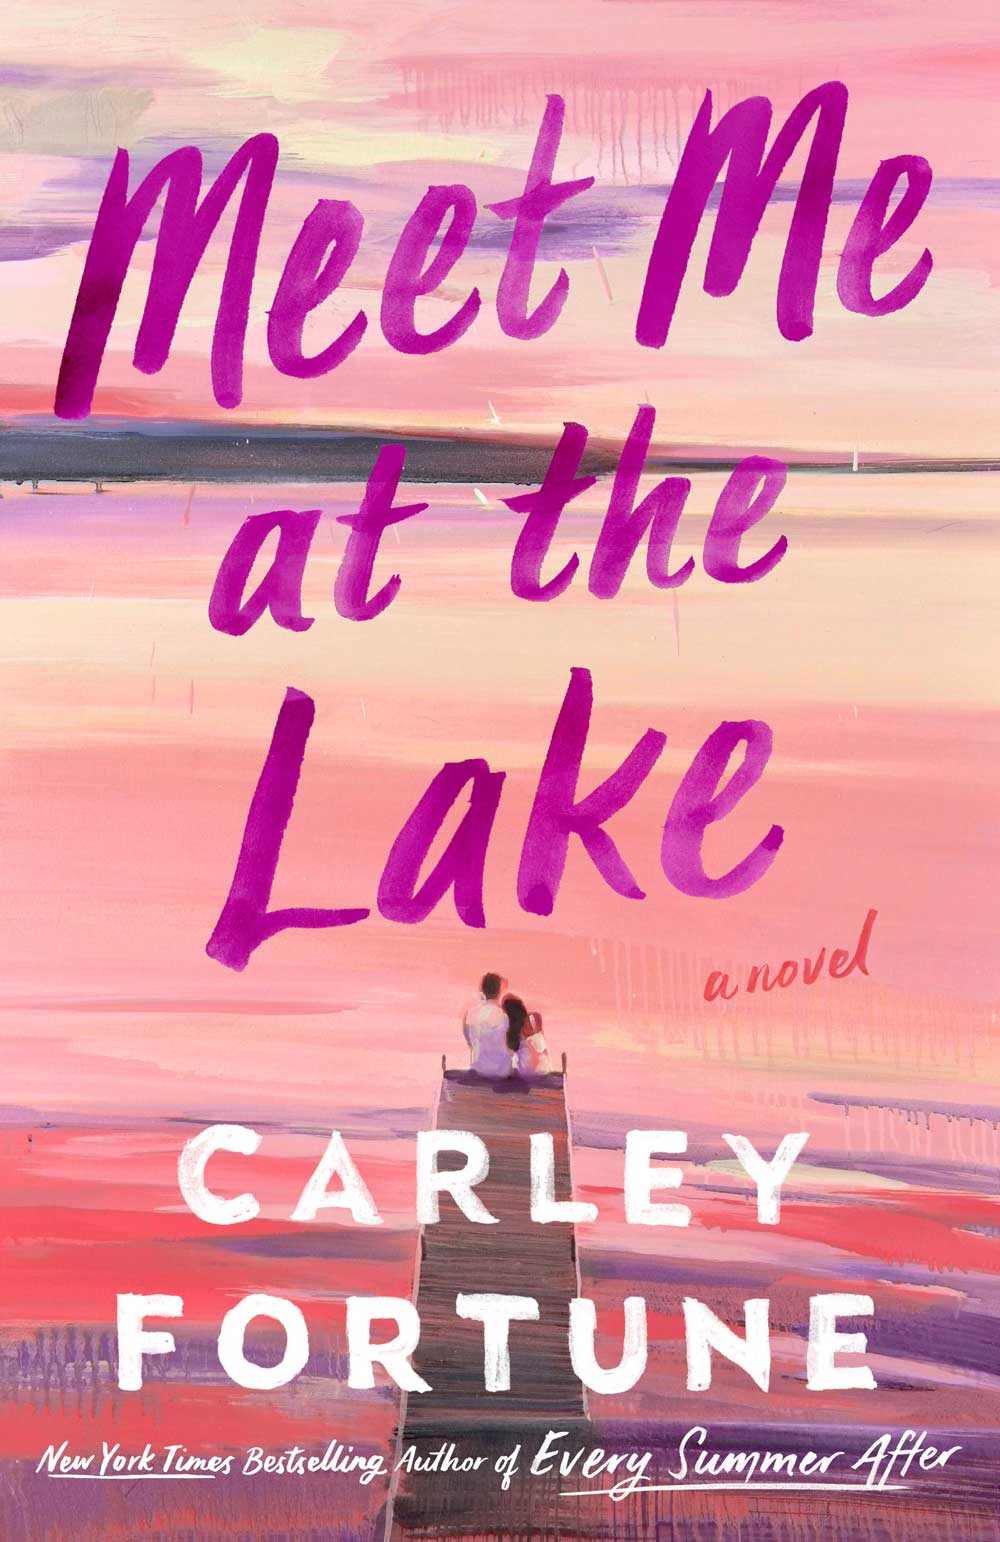 Book cover of Meet Me at the Lake. Watercolour-like painting of a couple leaning on each other at the end of a dock during sunset.